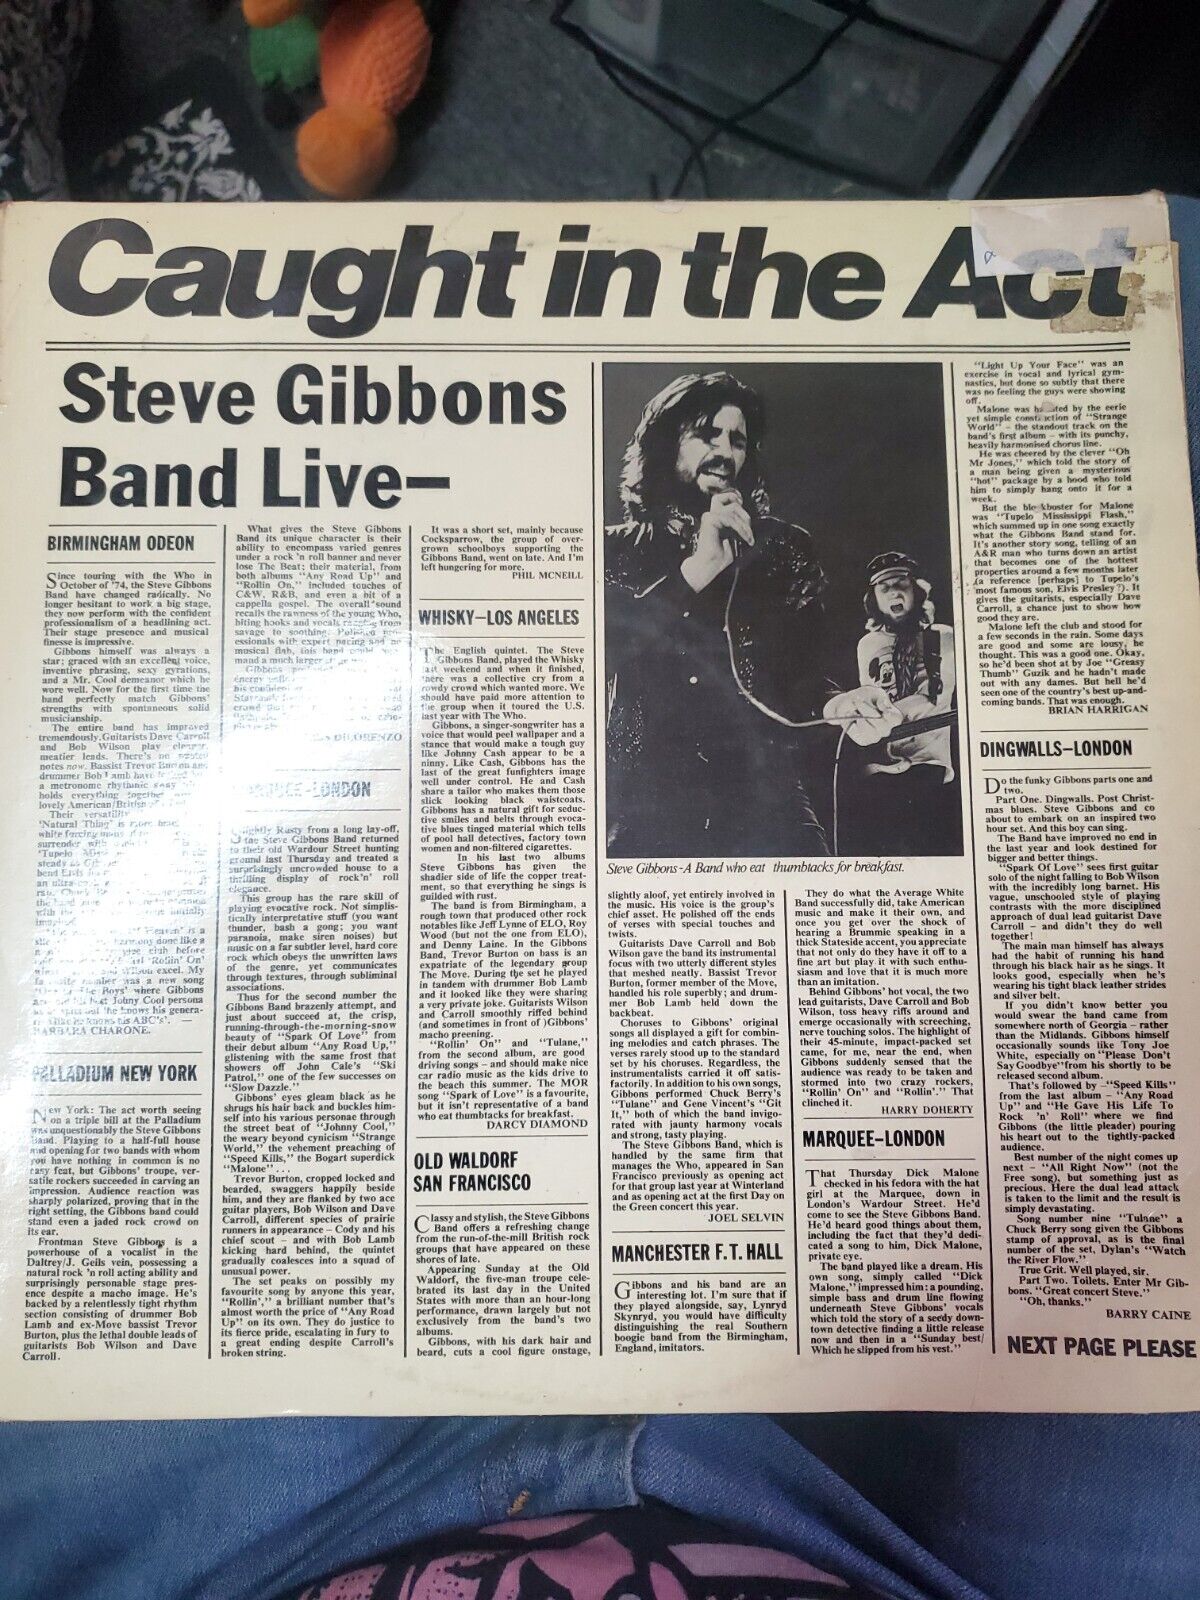 Steve Gibbons Band Caught in the Act UK Import Polydor Records 2478 112 vinyl LP